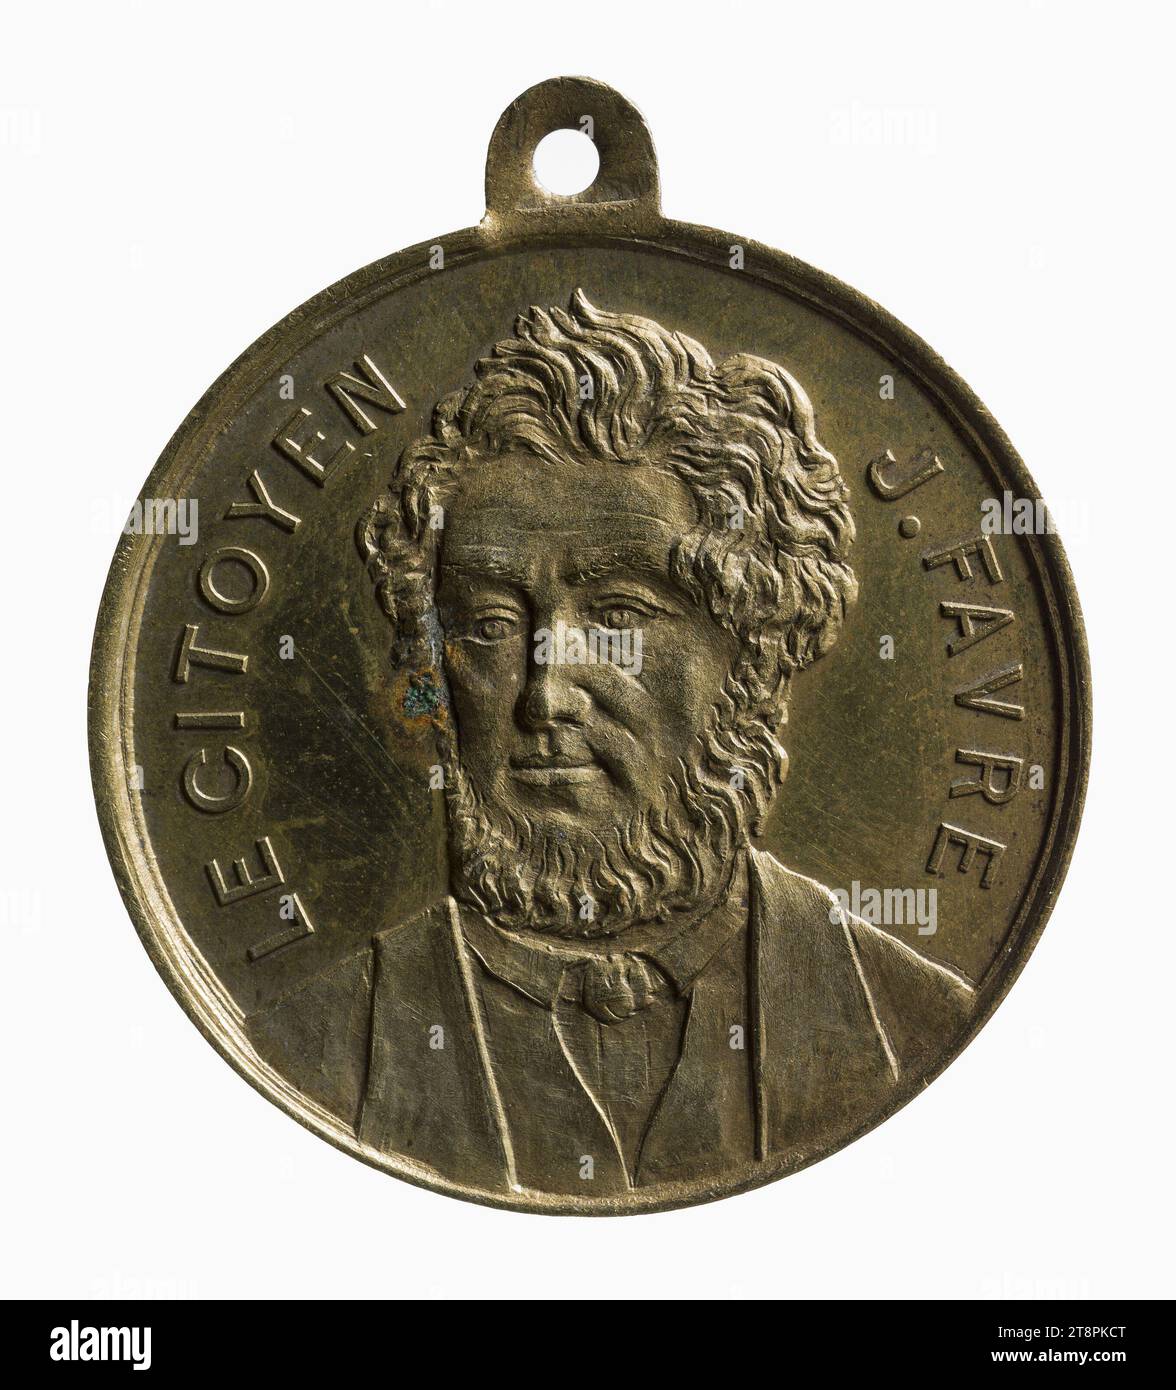 Jules Favre, member of the government of the national defense, 19th century, Numismatics, Medal, Metal, Gilt = gilding, Dimensions - Work: Diameter: 2.8 cm, Weight (type dimension): 7.22 g Stock Photo